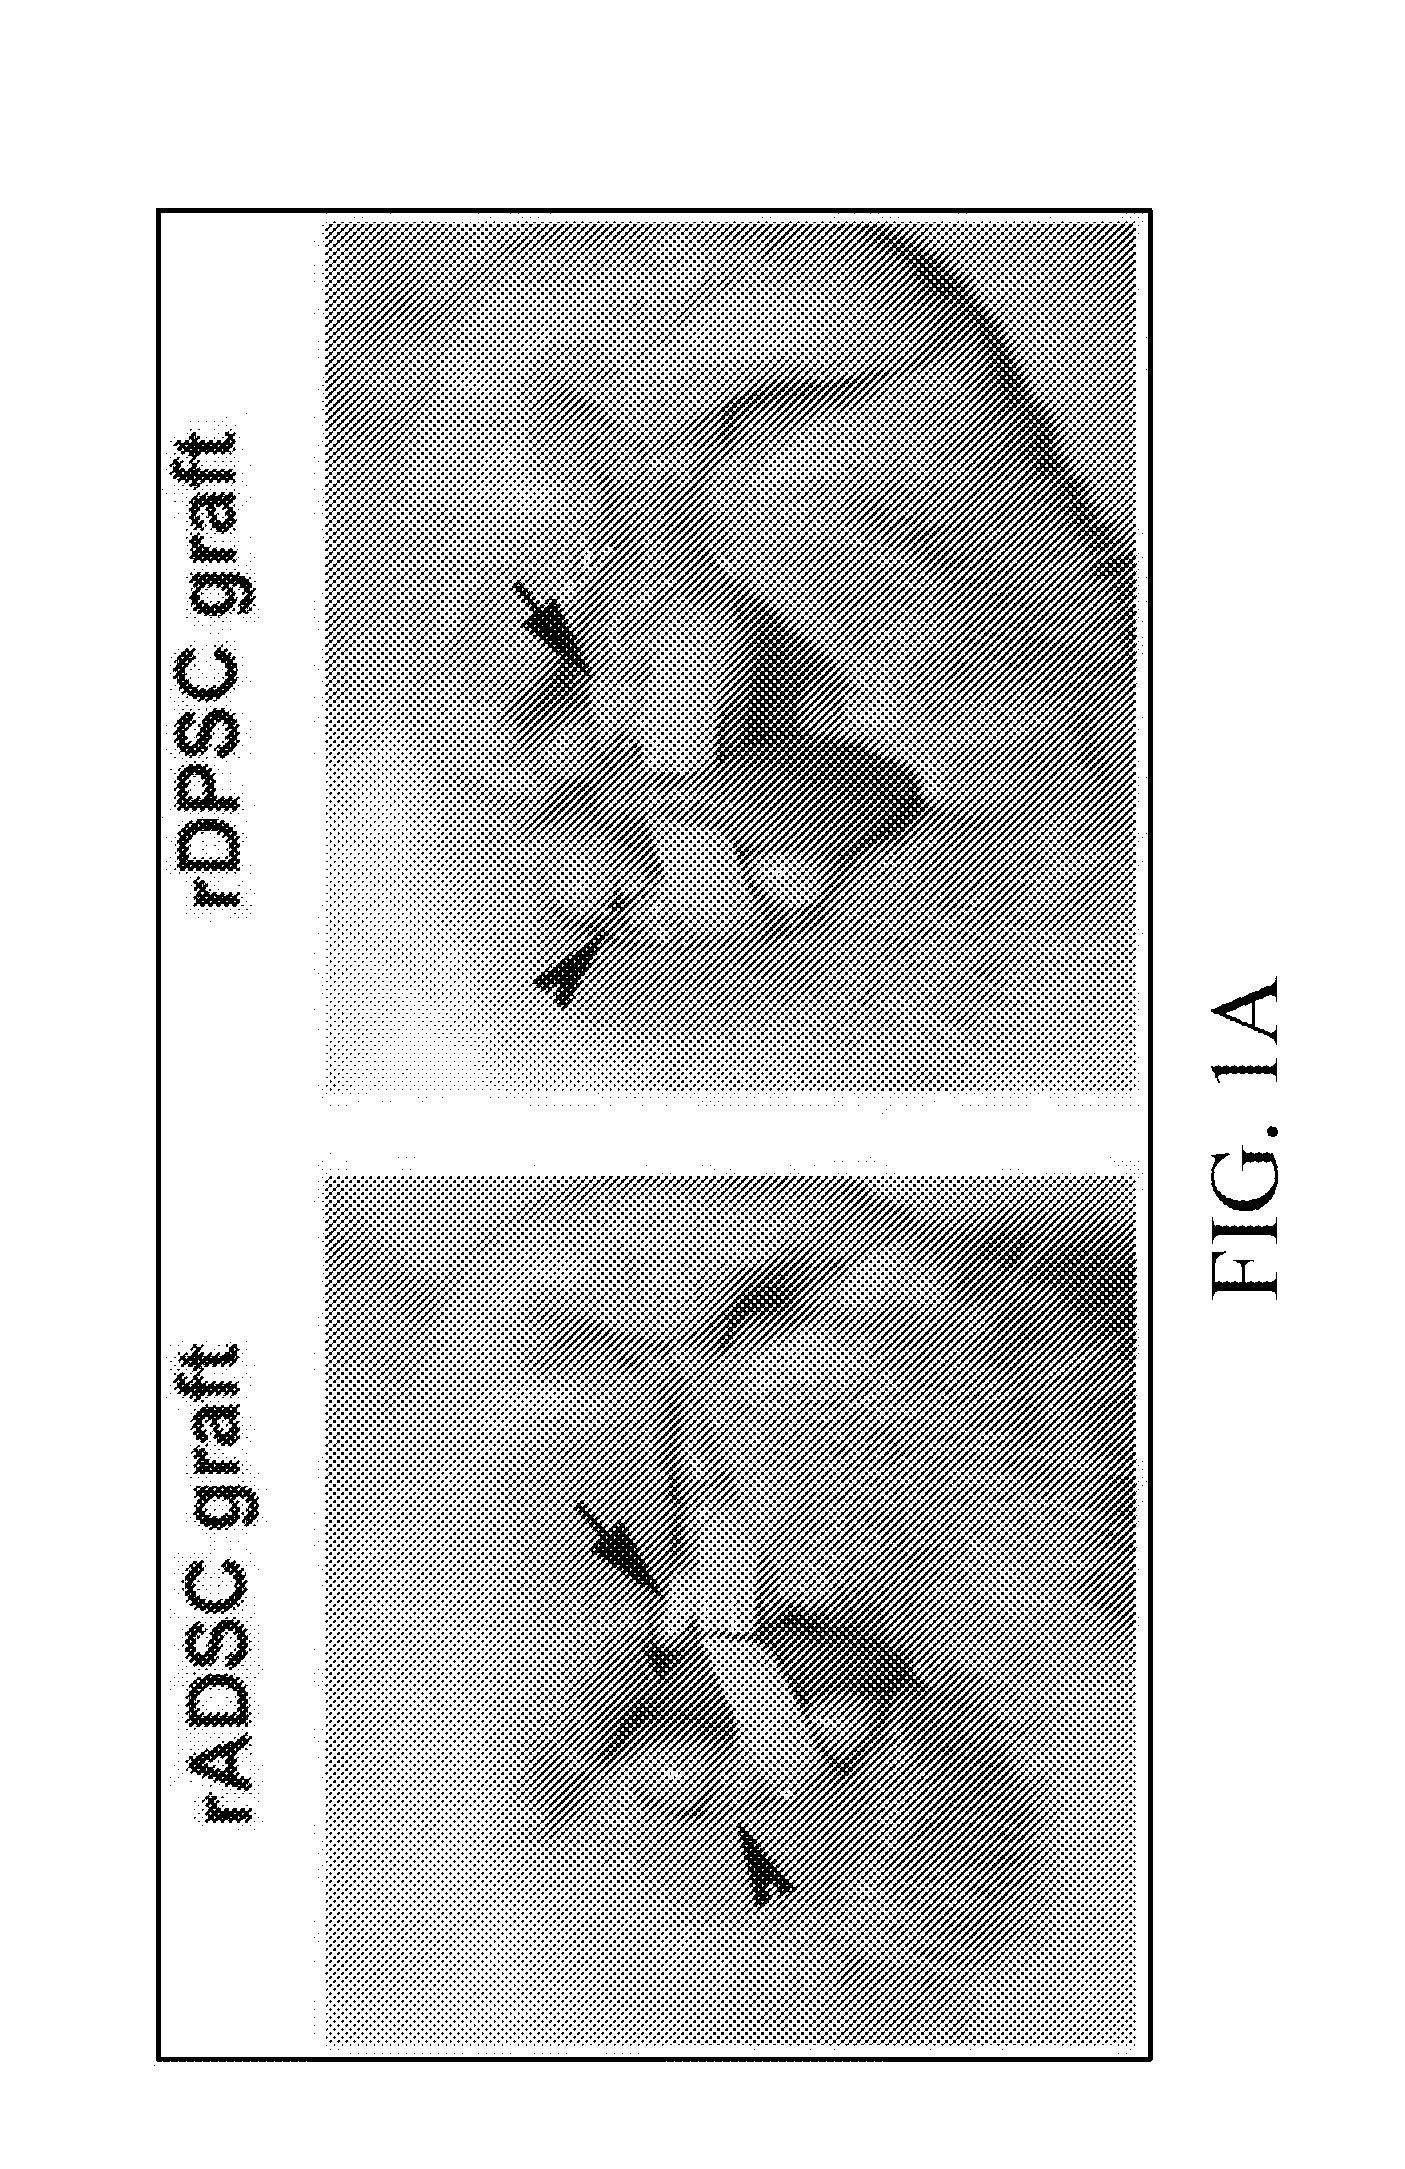 Method of implanting mesenchymal stem cells for natural tooth regeneration in surgically prepared extraction socket and compositions thereof